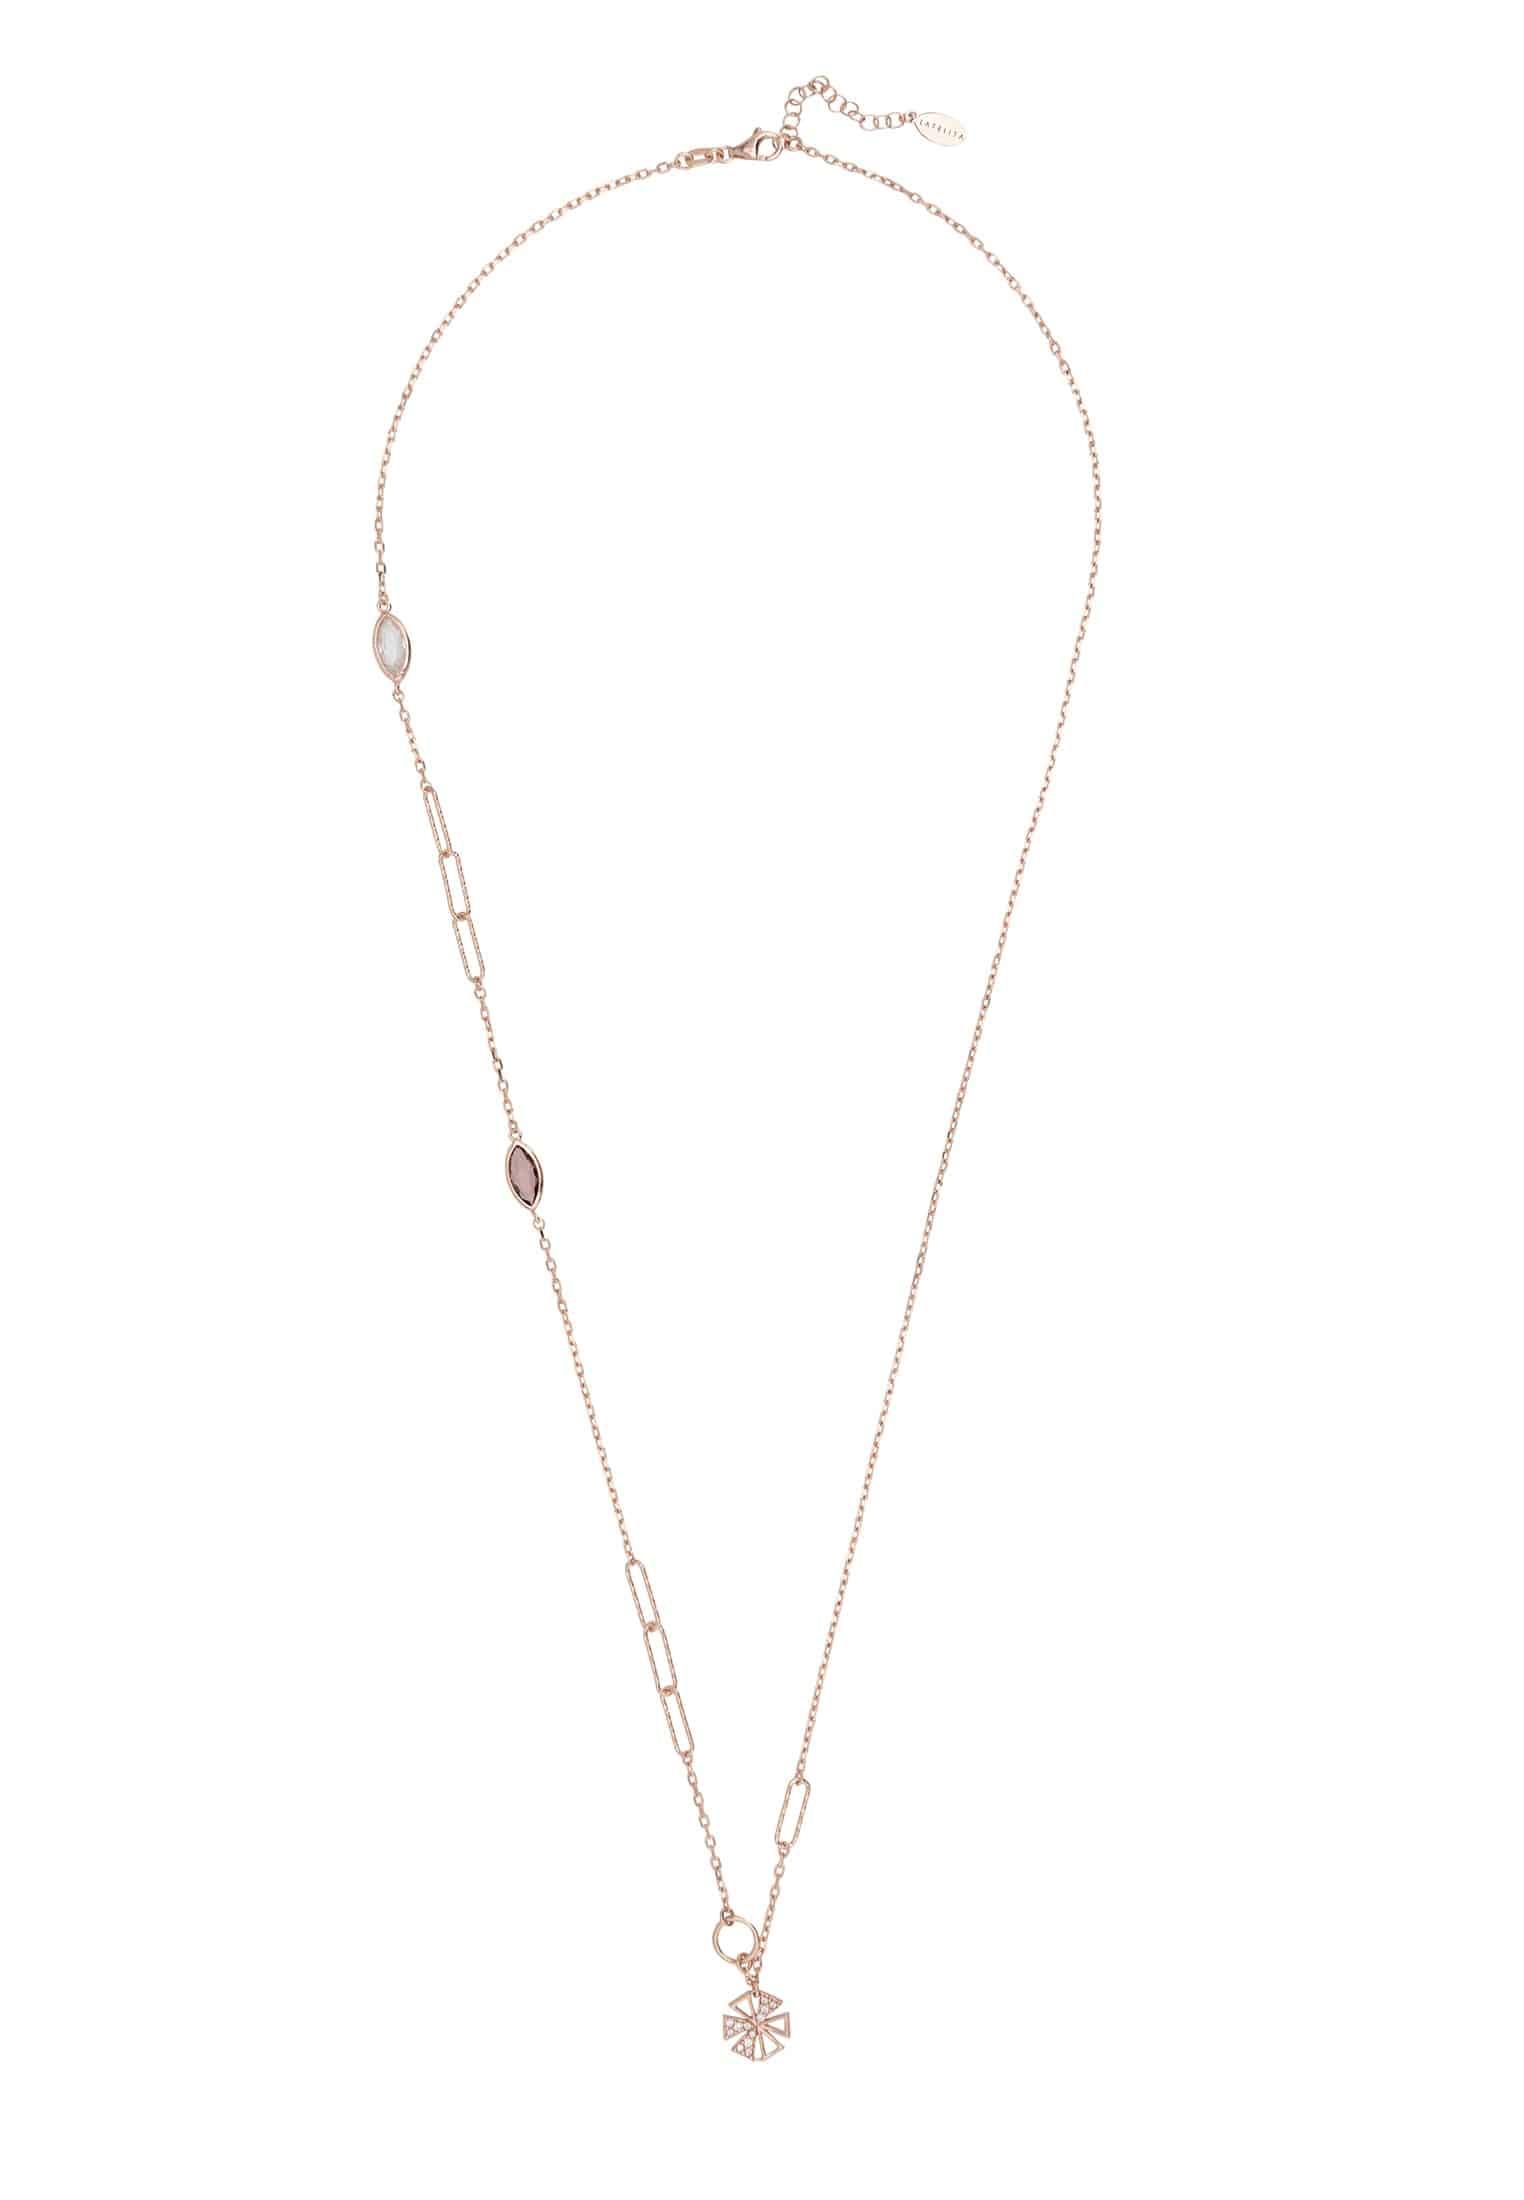 Rosegold Paris Long Necklace with Amethyst and Flower Motif - Delicate Jewelry with Sparkle and Charm - Jewelry & Watches - Bijou Her -  -  - 